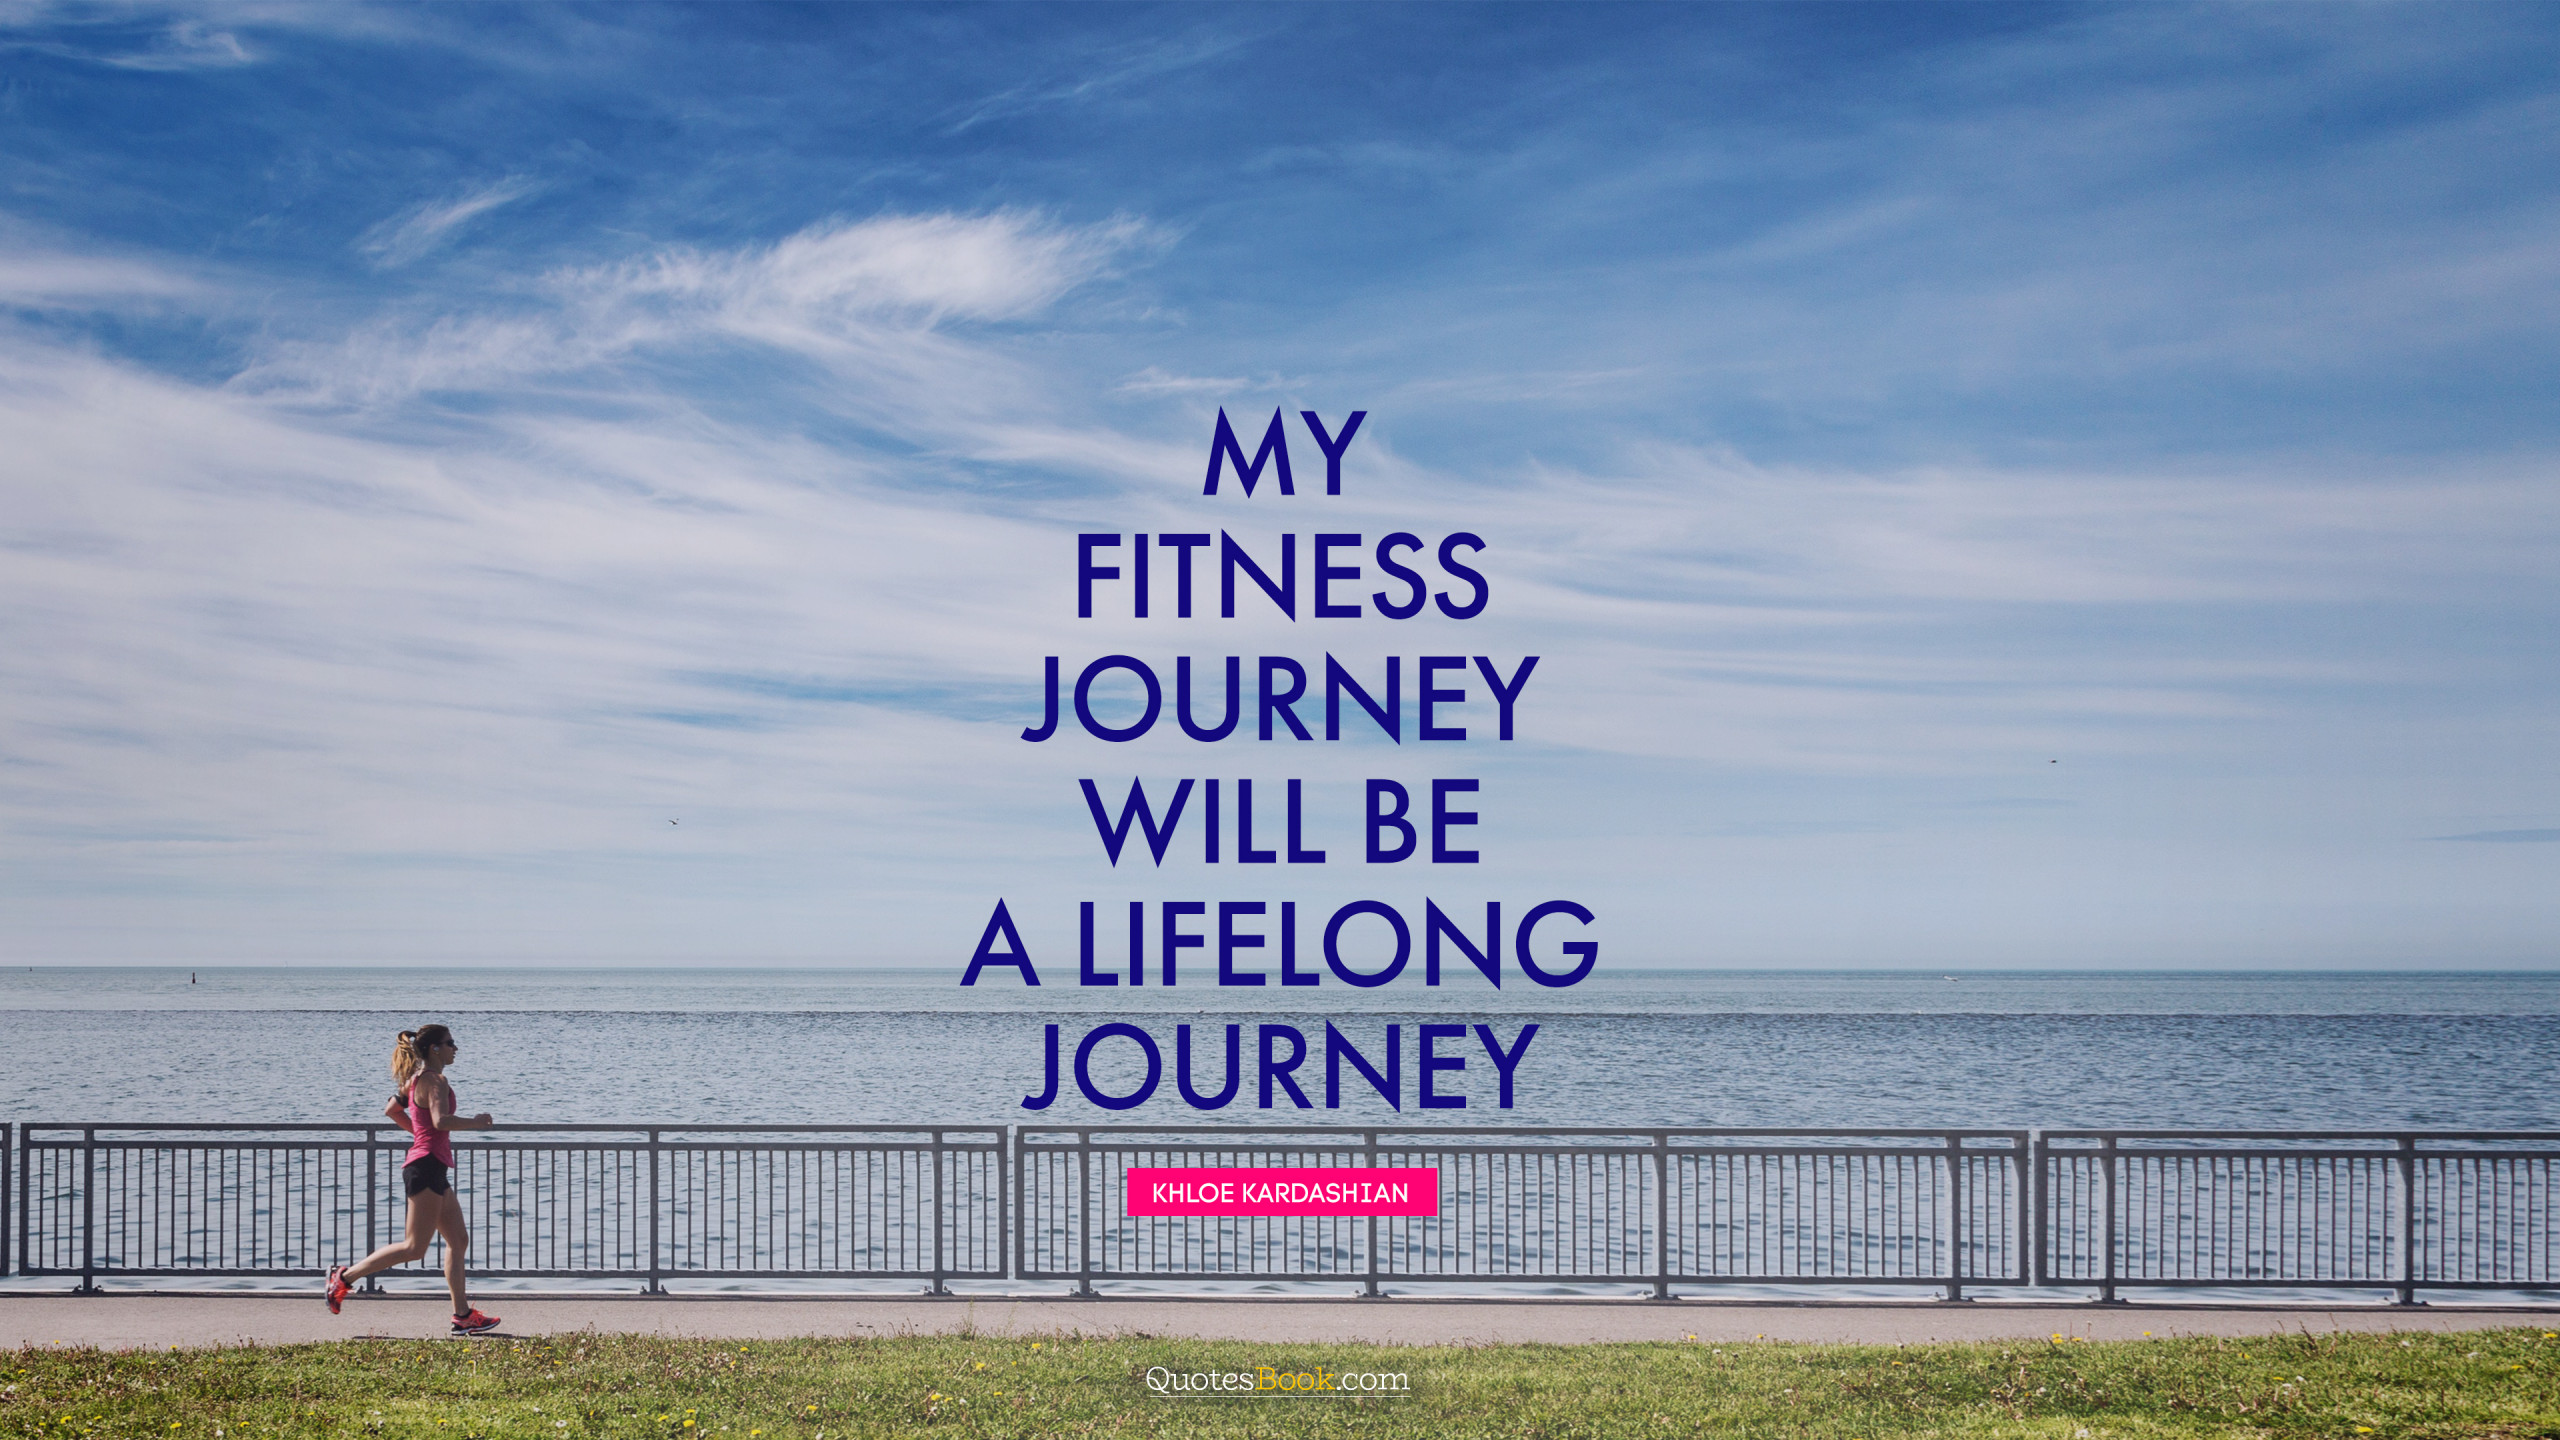 My fitness journey will be a lifelong journey. - Quote by Khloe